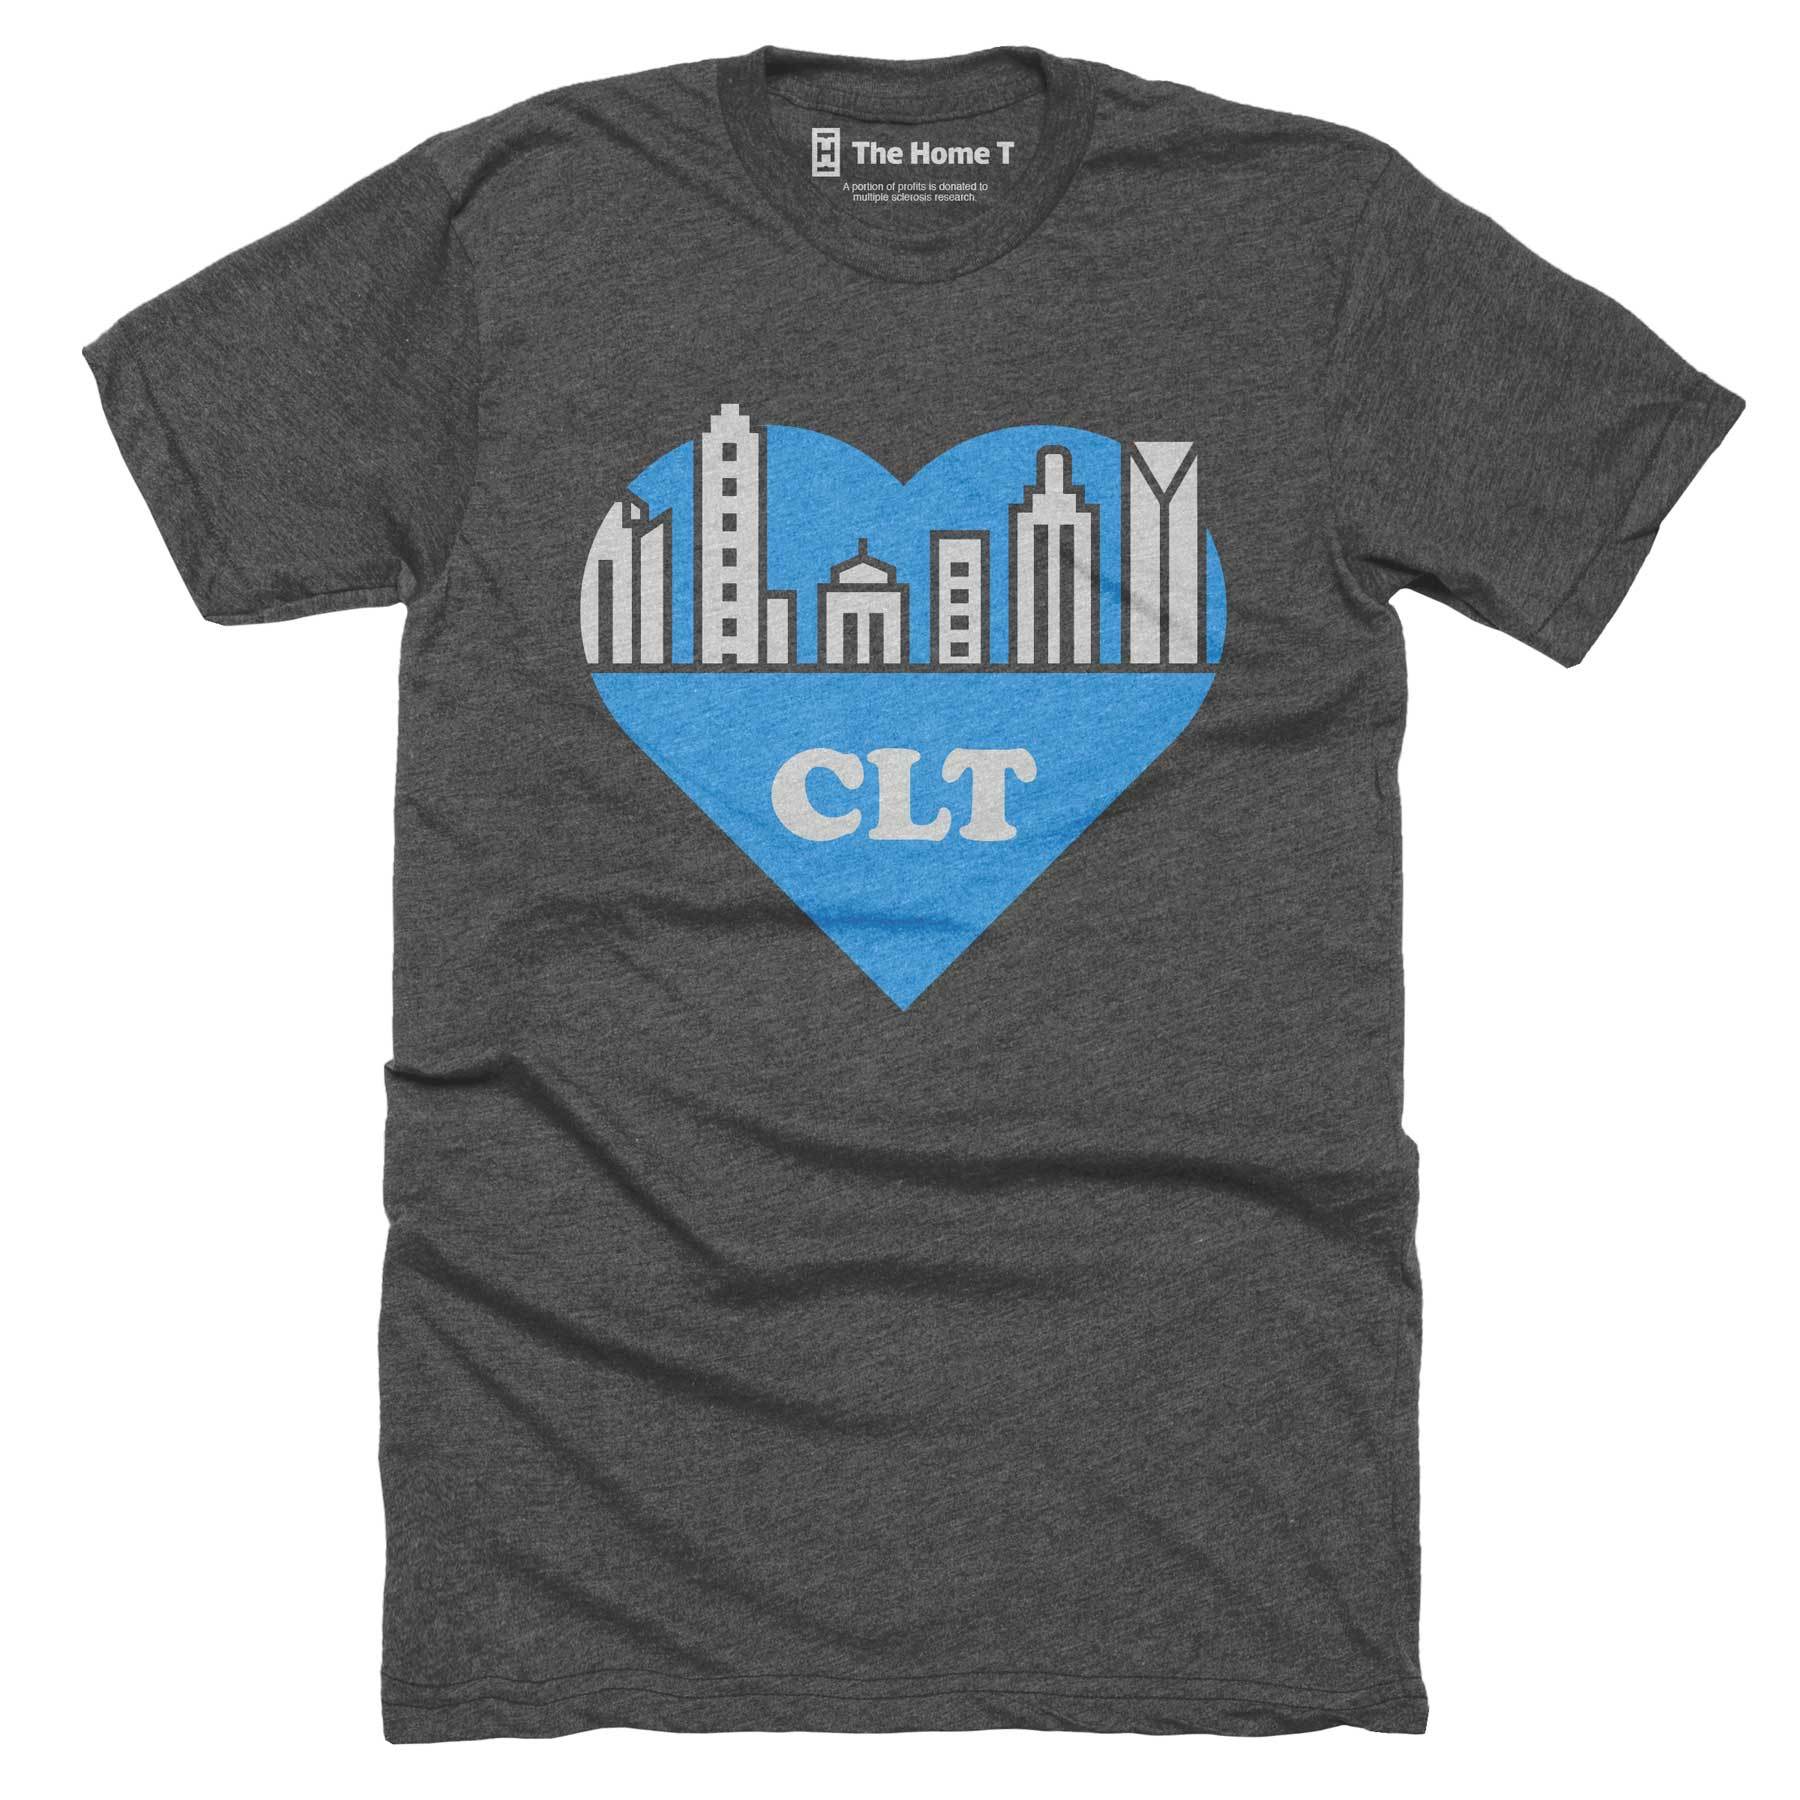 Charlotte Skyline Crew neck The Home T XS Blue